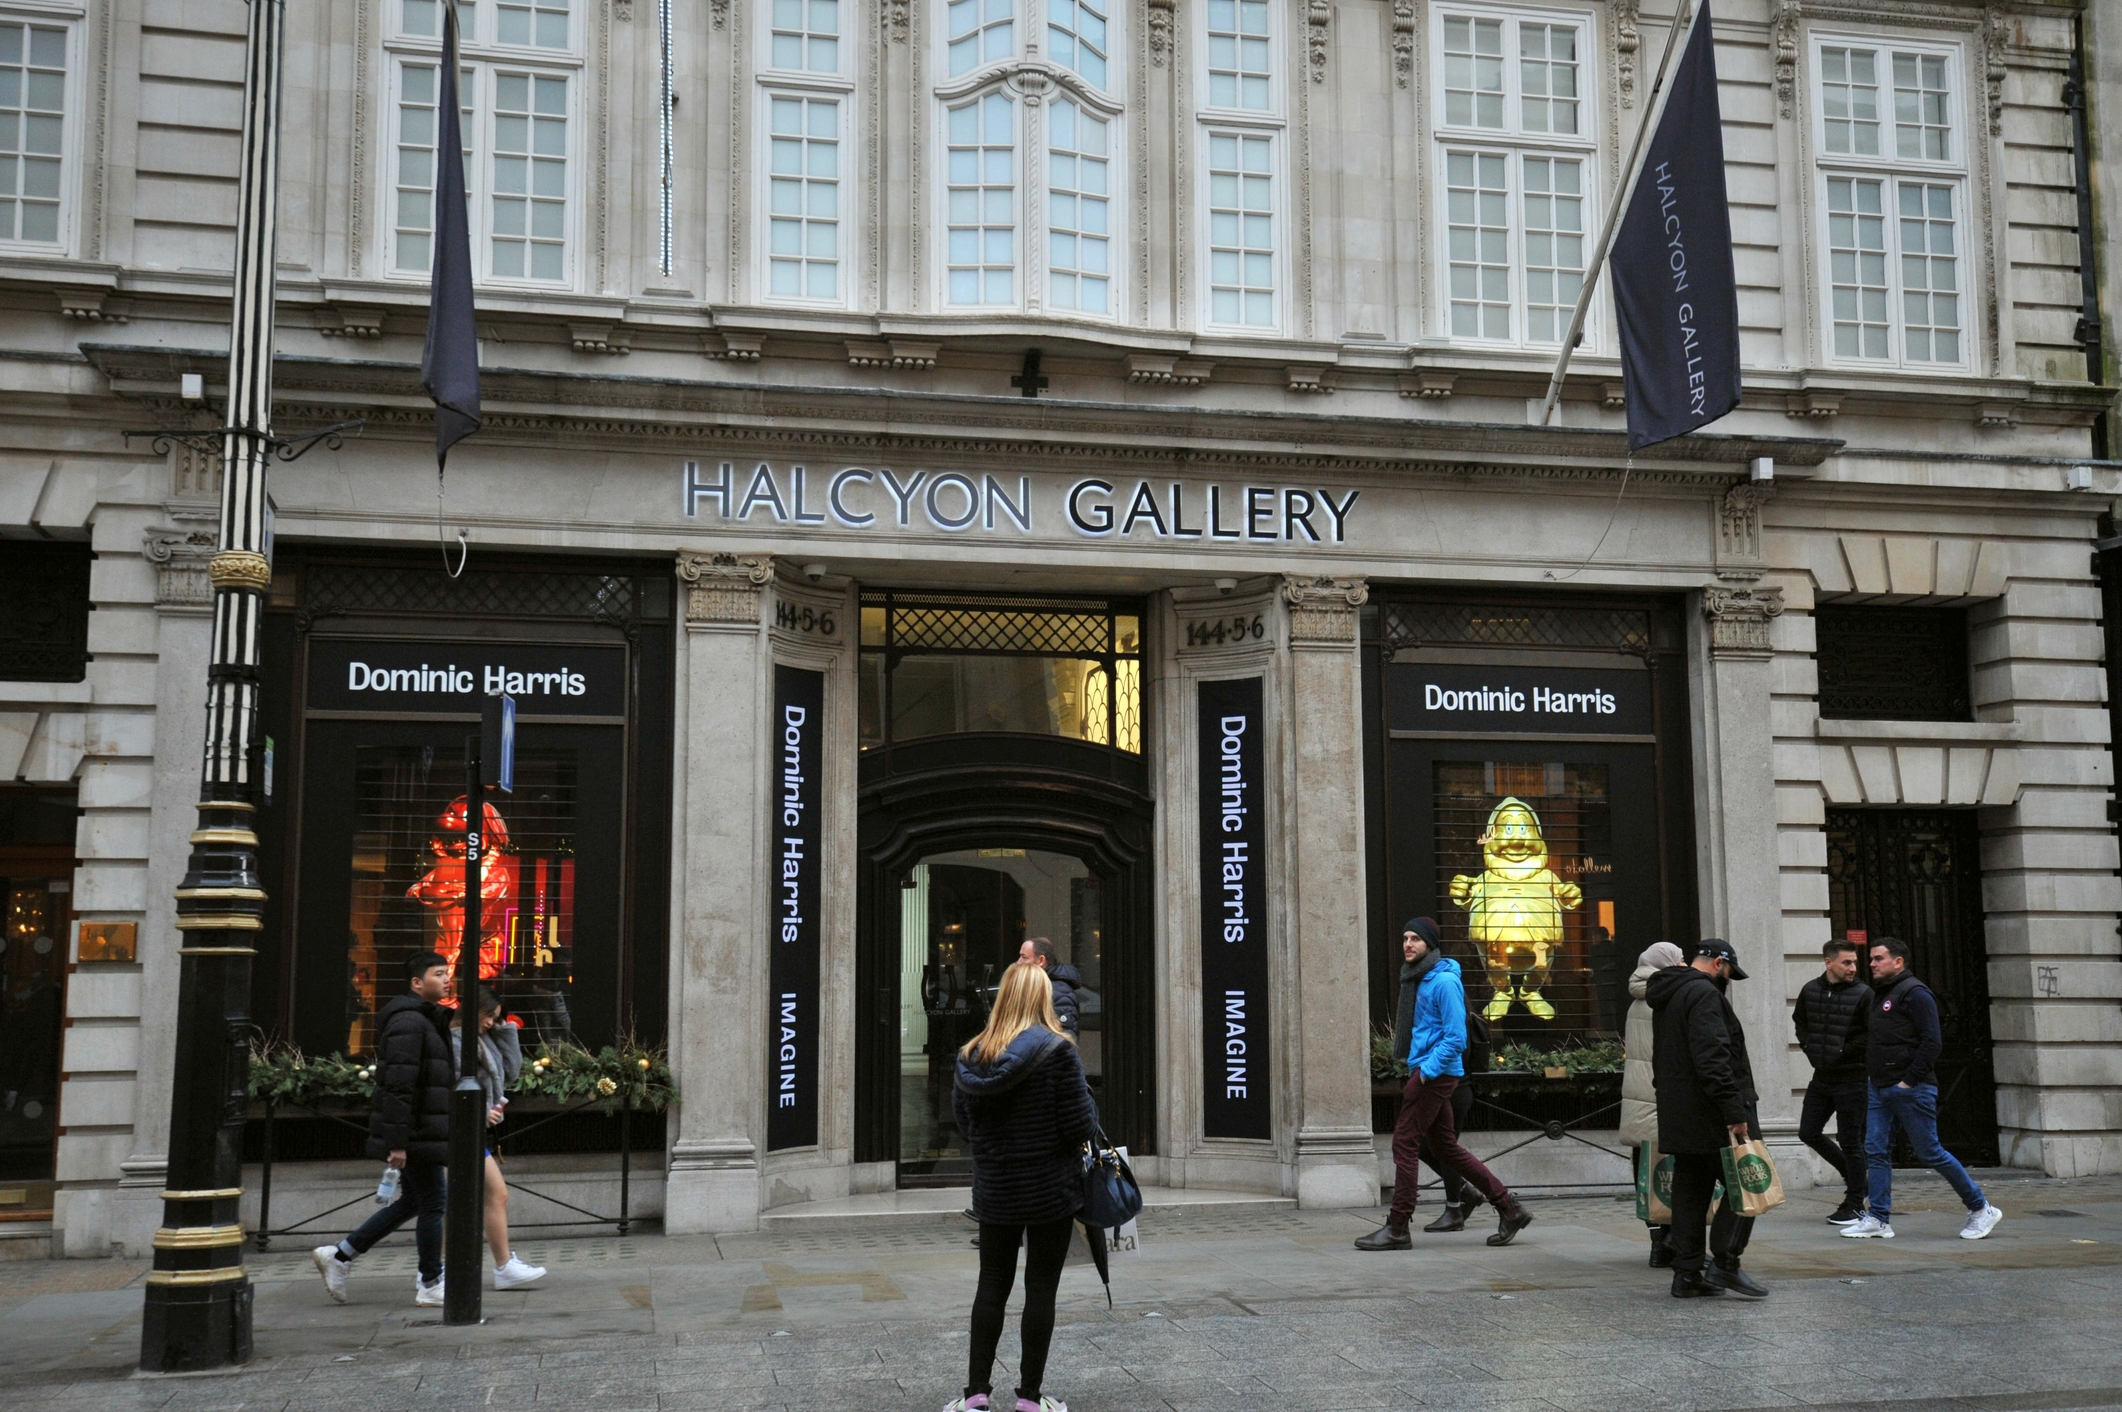 People outside Halcyon, one of the must-see London art galleries